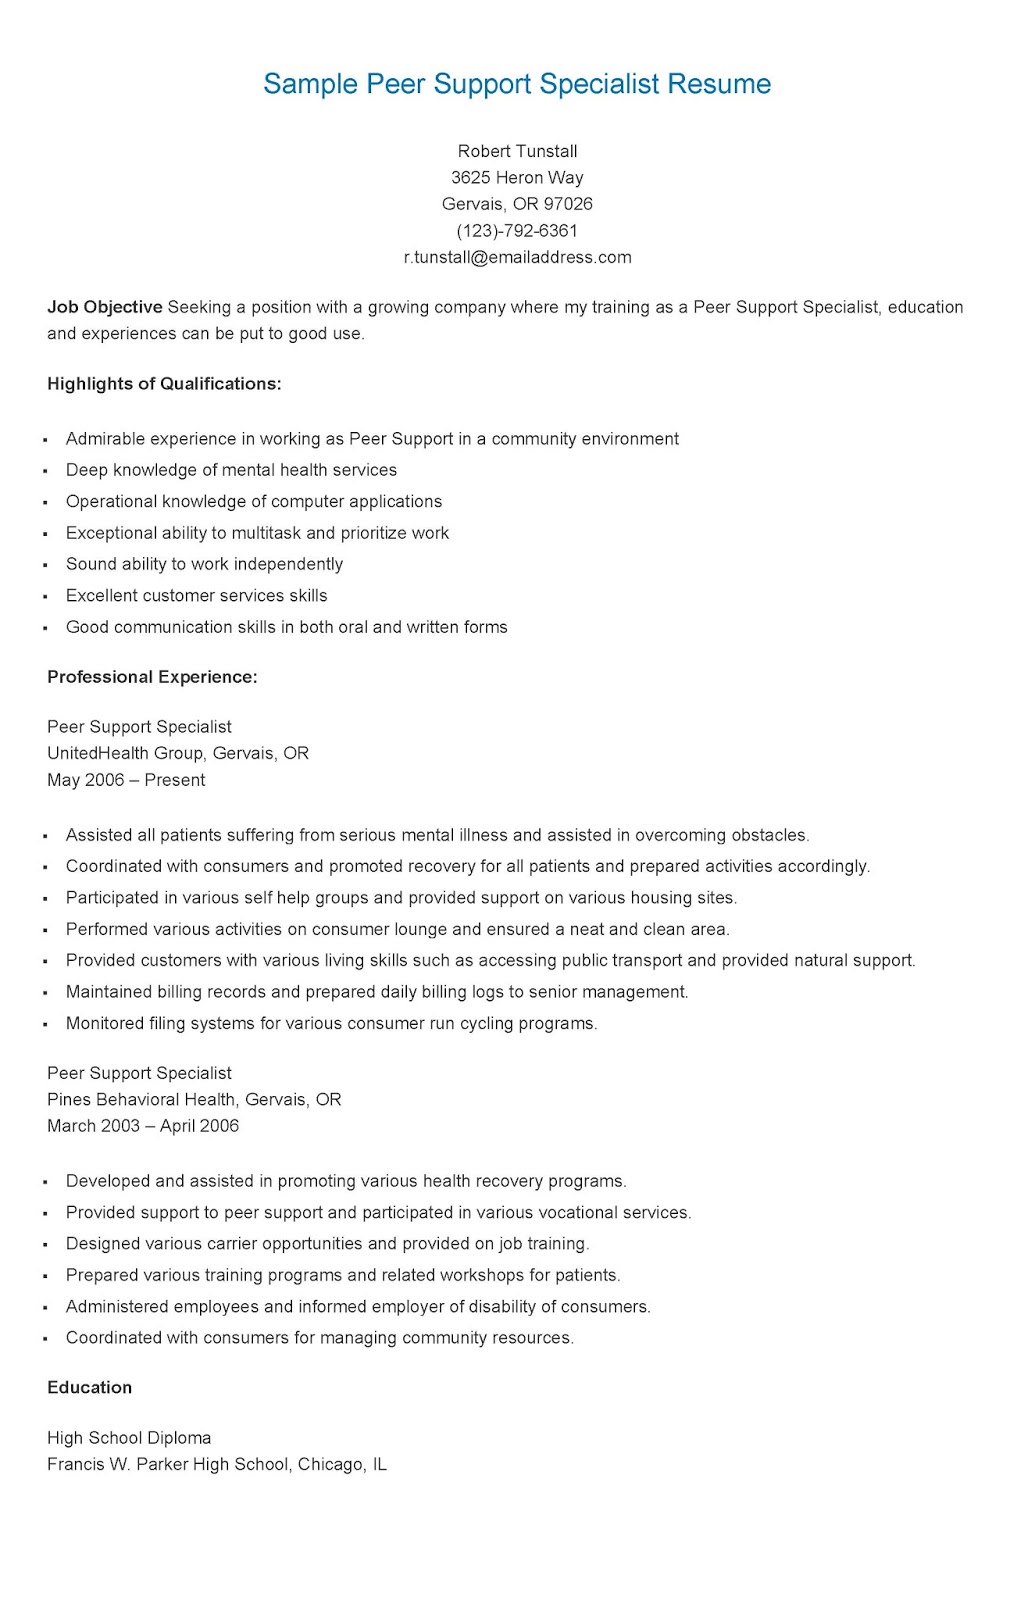 Sample resume for government contract specialist